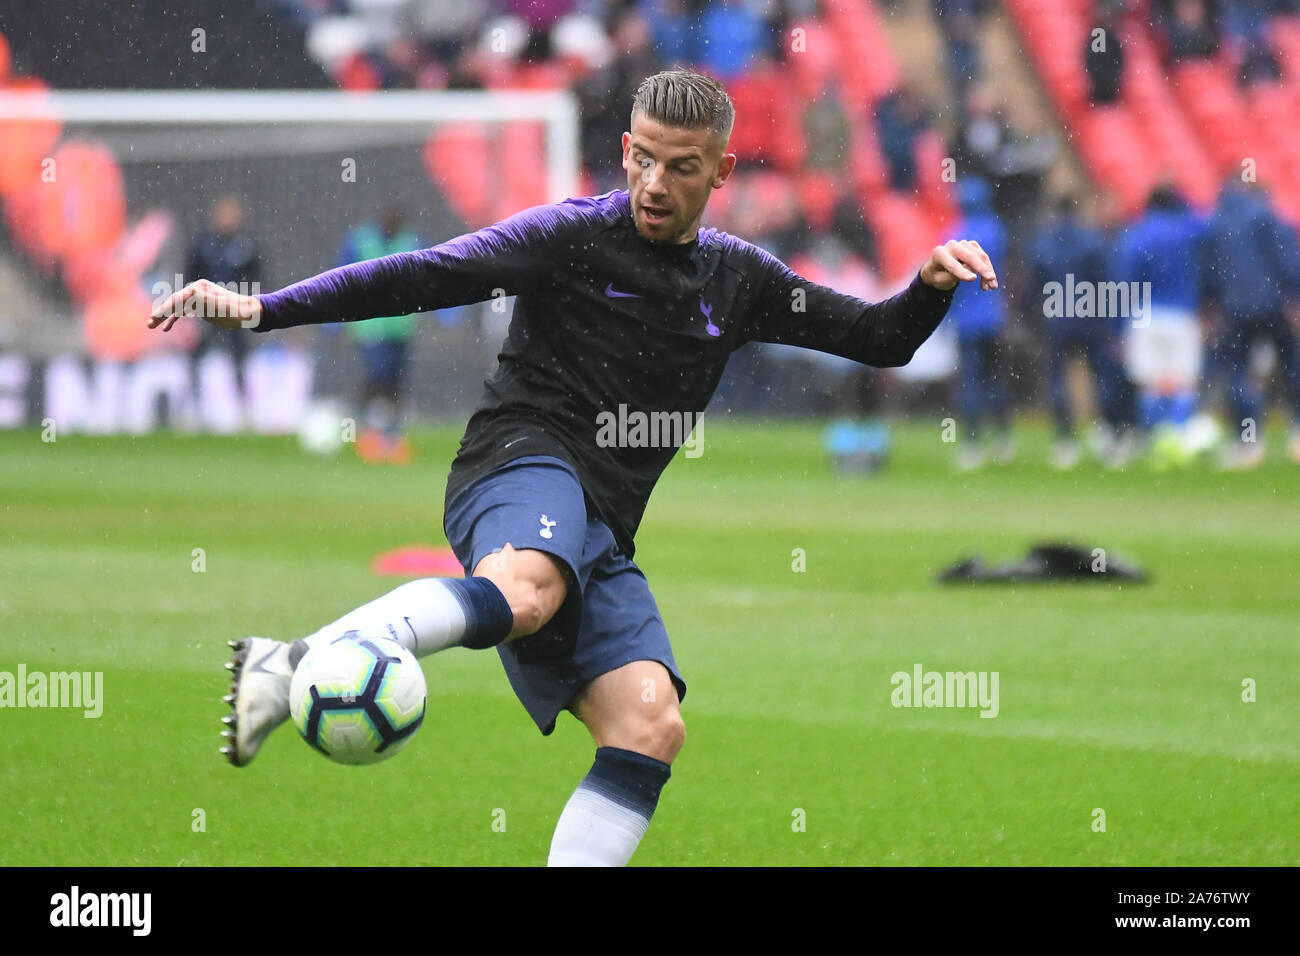 LONDON, ENGLAND - OCTOBER 6, 2018: Toby Alderweireld of Tottenham pictured prior to the 2018/19 English Premier League game between Tottenham Hotspur and Cardiff City at Wembley Stadium. Stock Photo